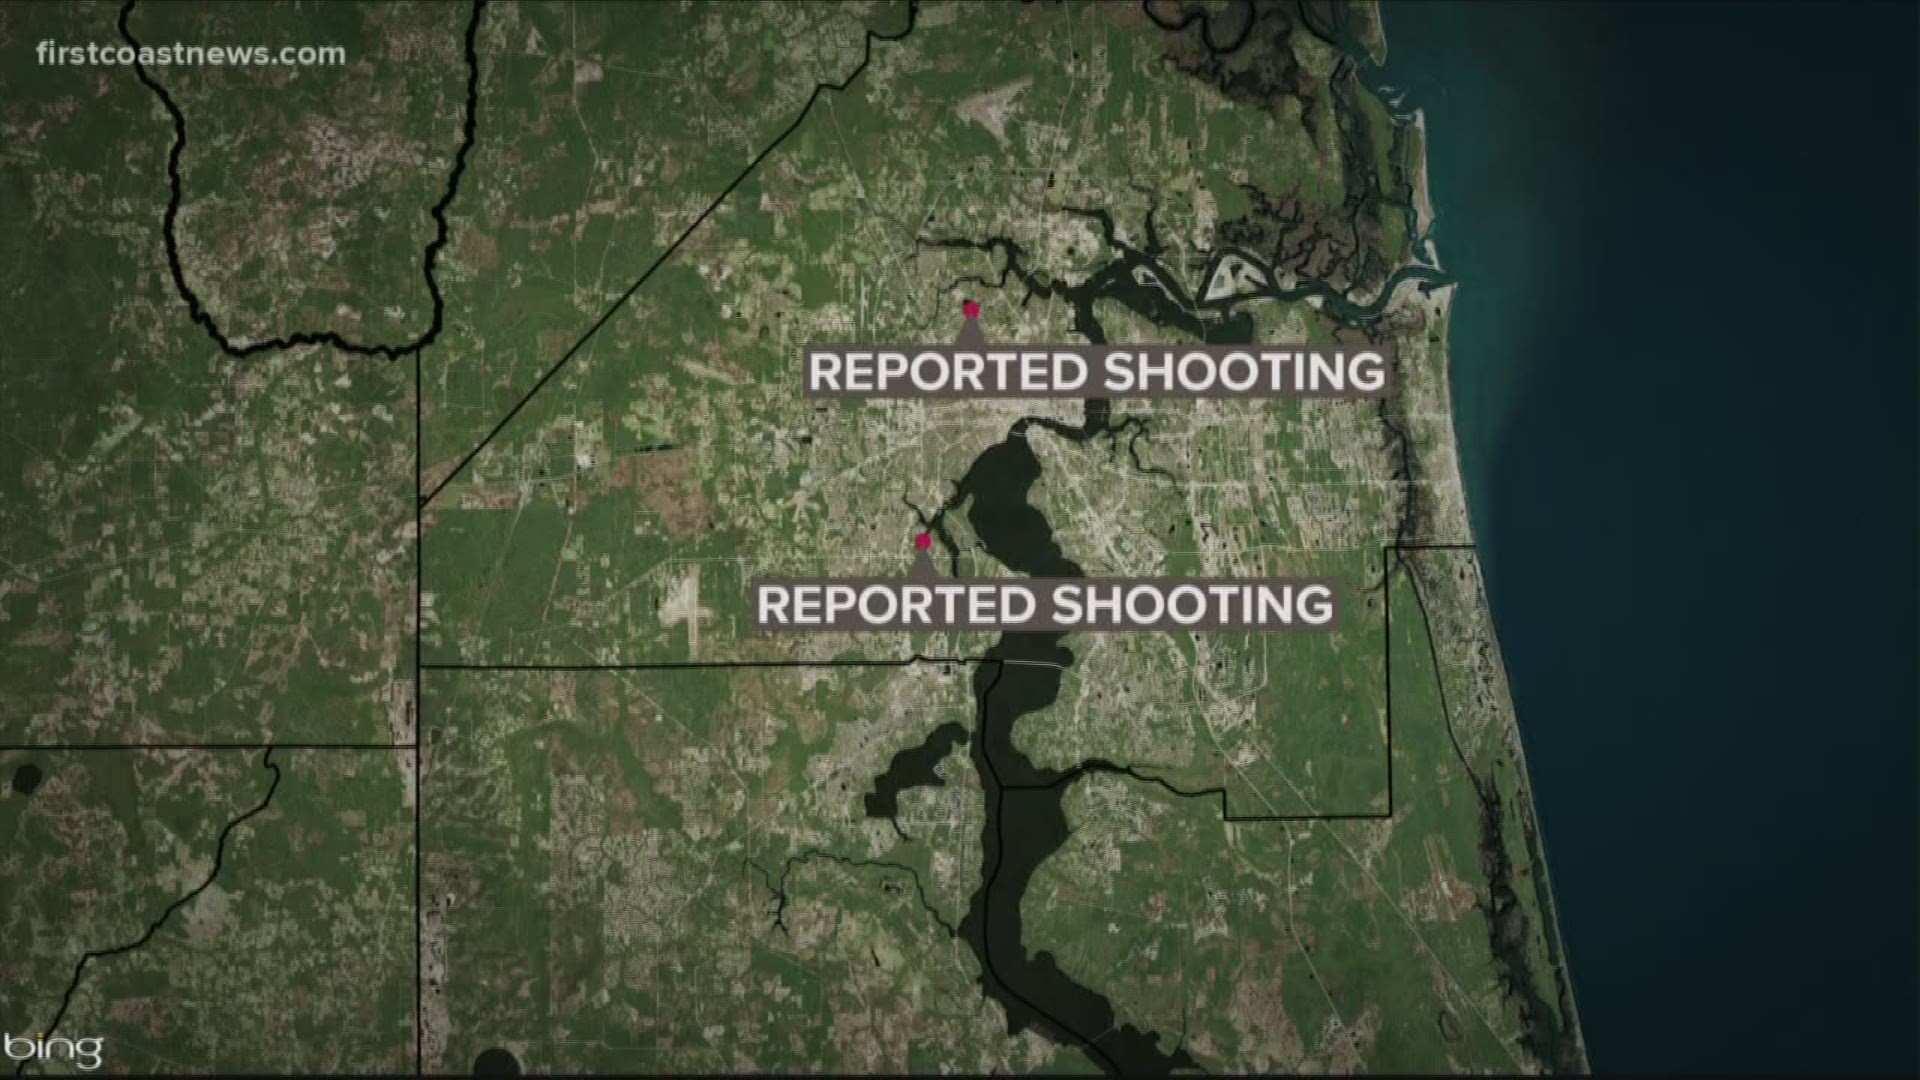 The Jacksonville Sheriff's Office is responding to reports of a person shot in Northwest Jacksonville, as well as a separate shooting in Ortega Farms.